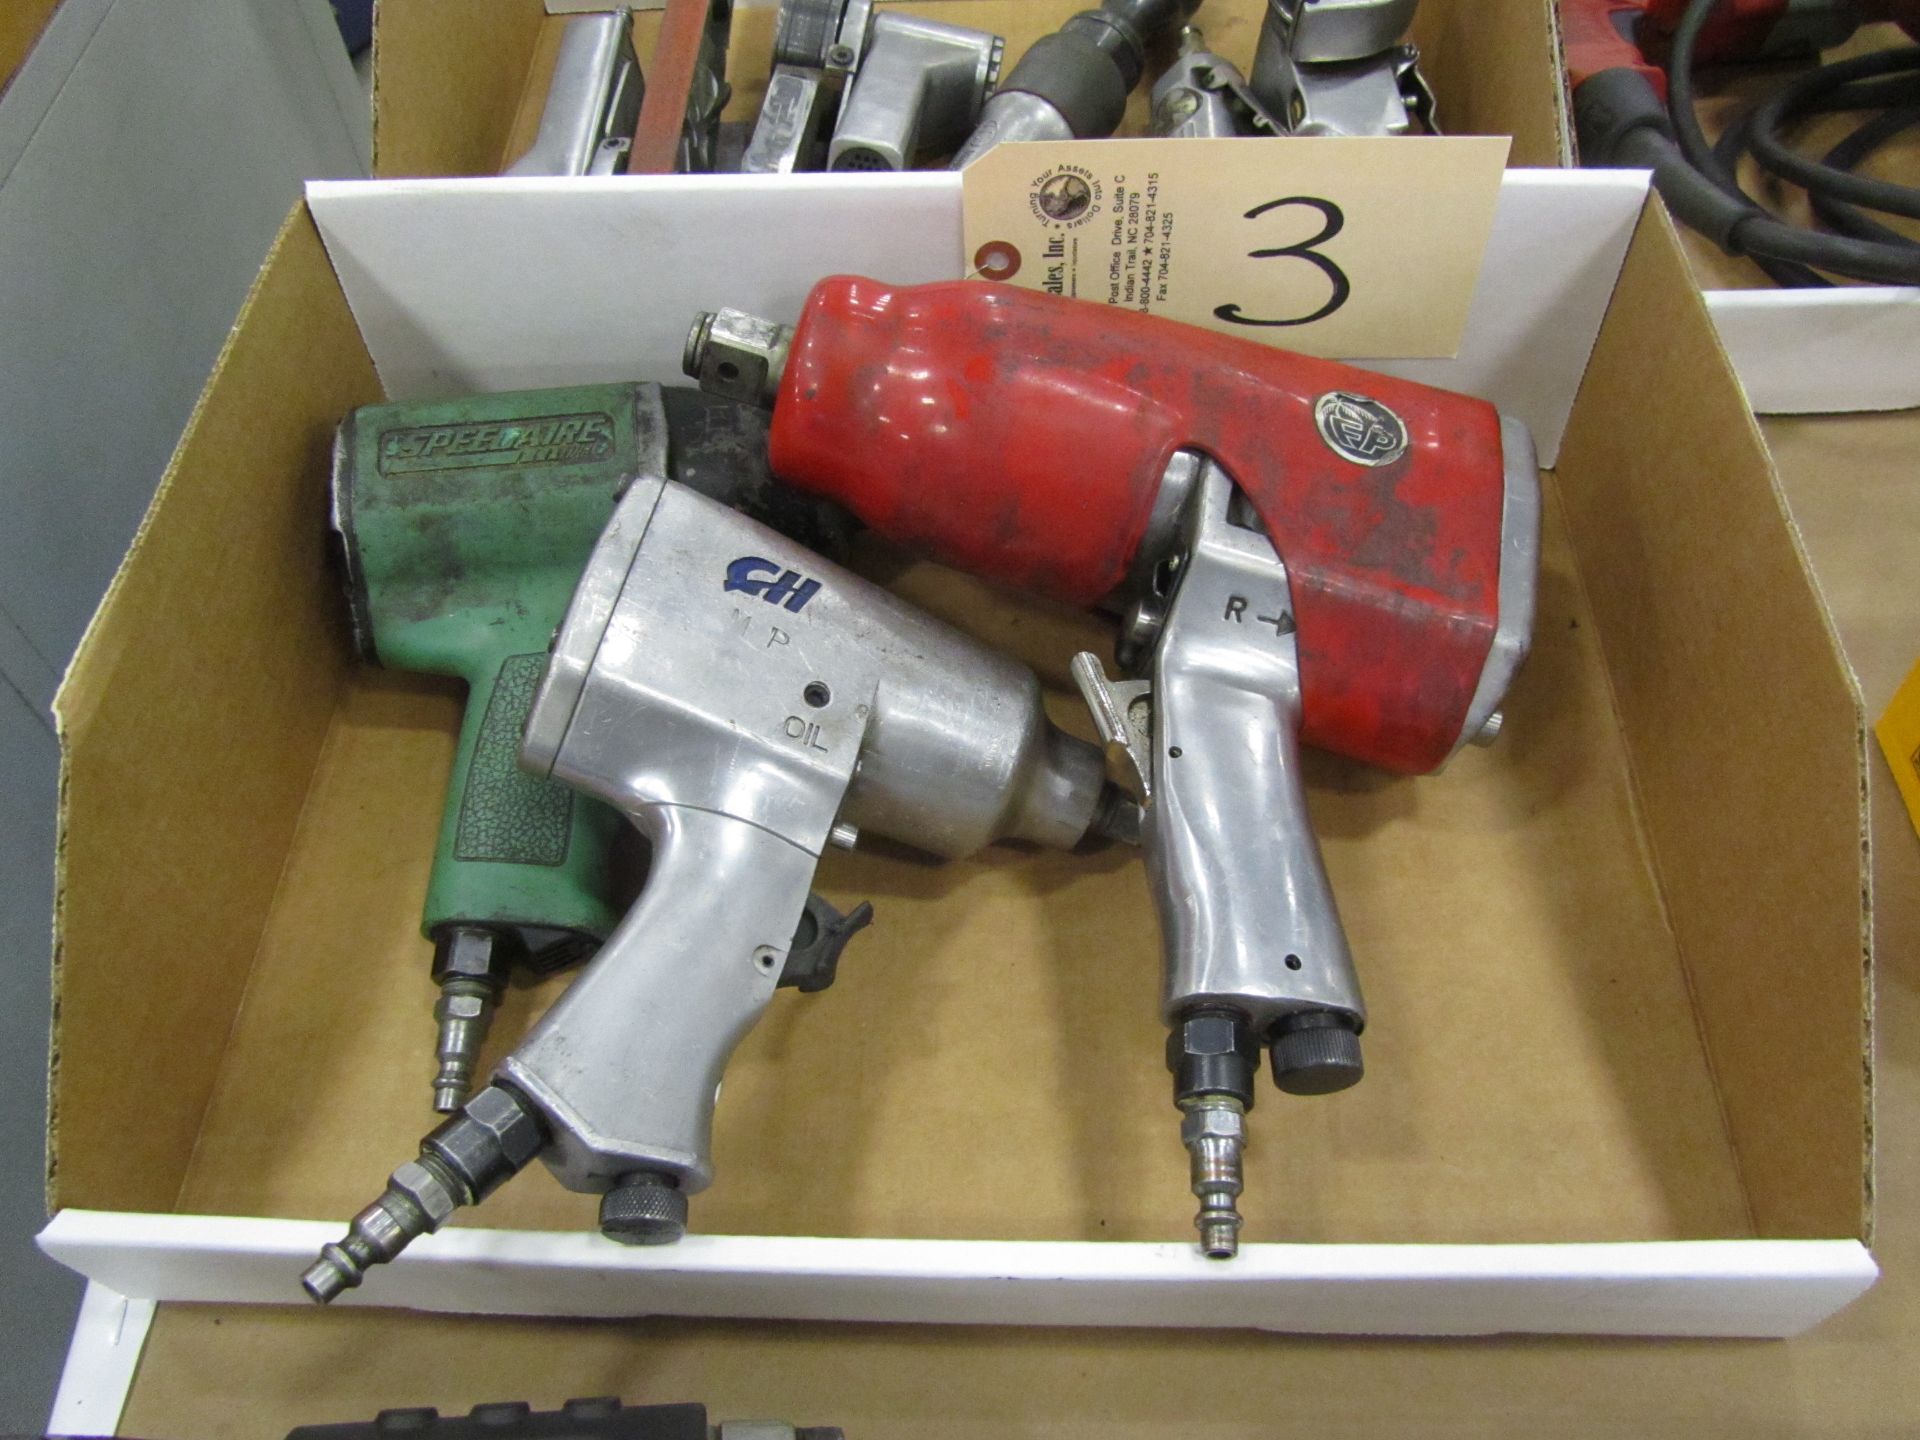 (2) Pneumatic Wrenches